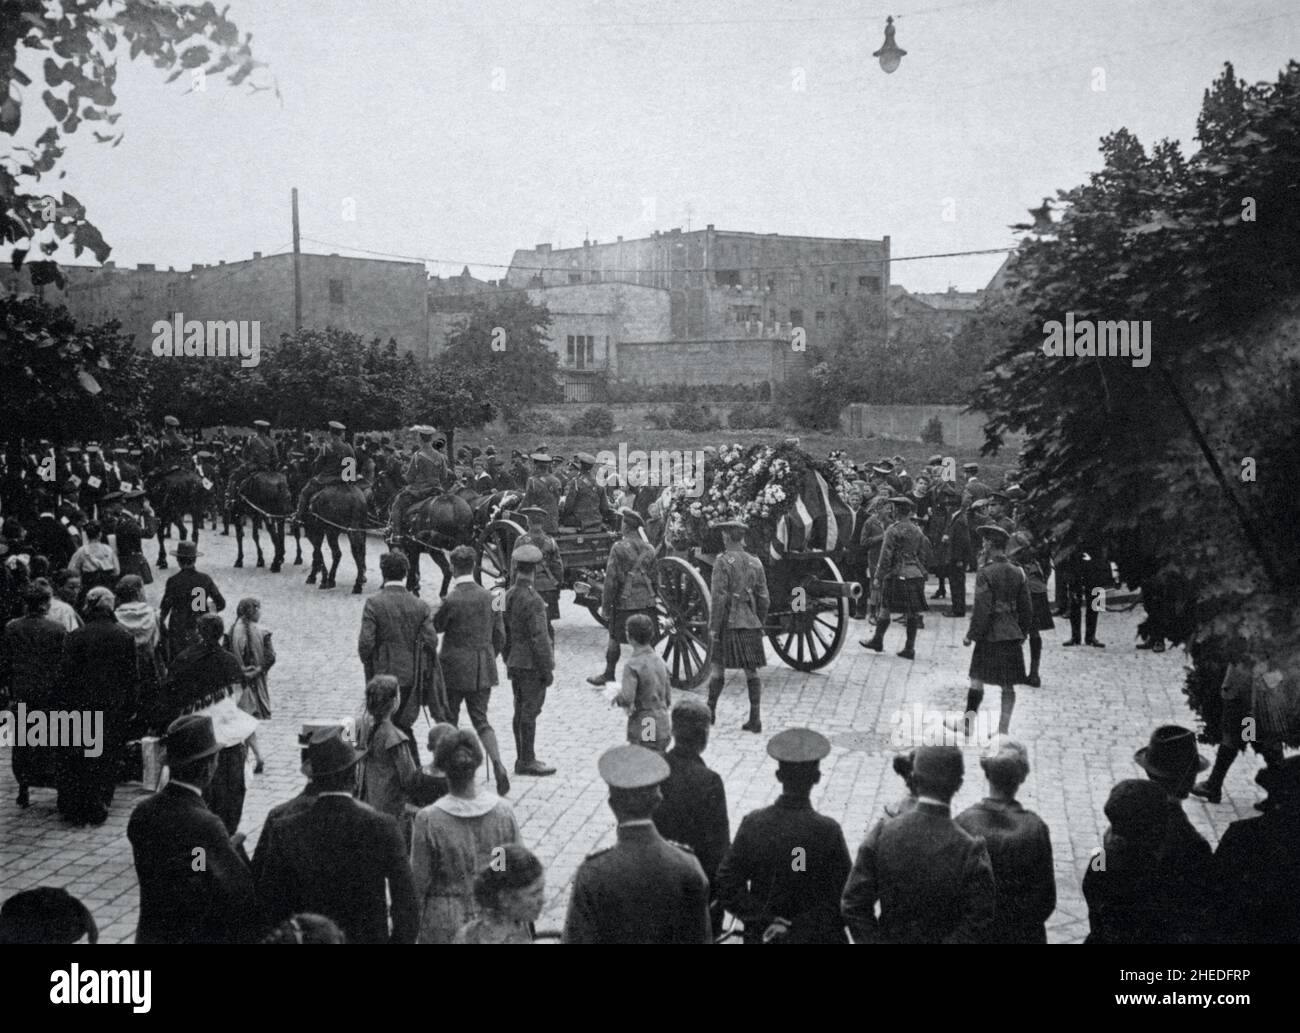 A historical view of a military funeral with the coffin drapped in a flag and pulled on a gun carriage. The coffin has a guard of honour of kilted Scottish infantrymen. Civilians and soldiers are watching the procession. Believed to be First World War era. Stock Photo